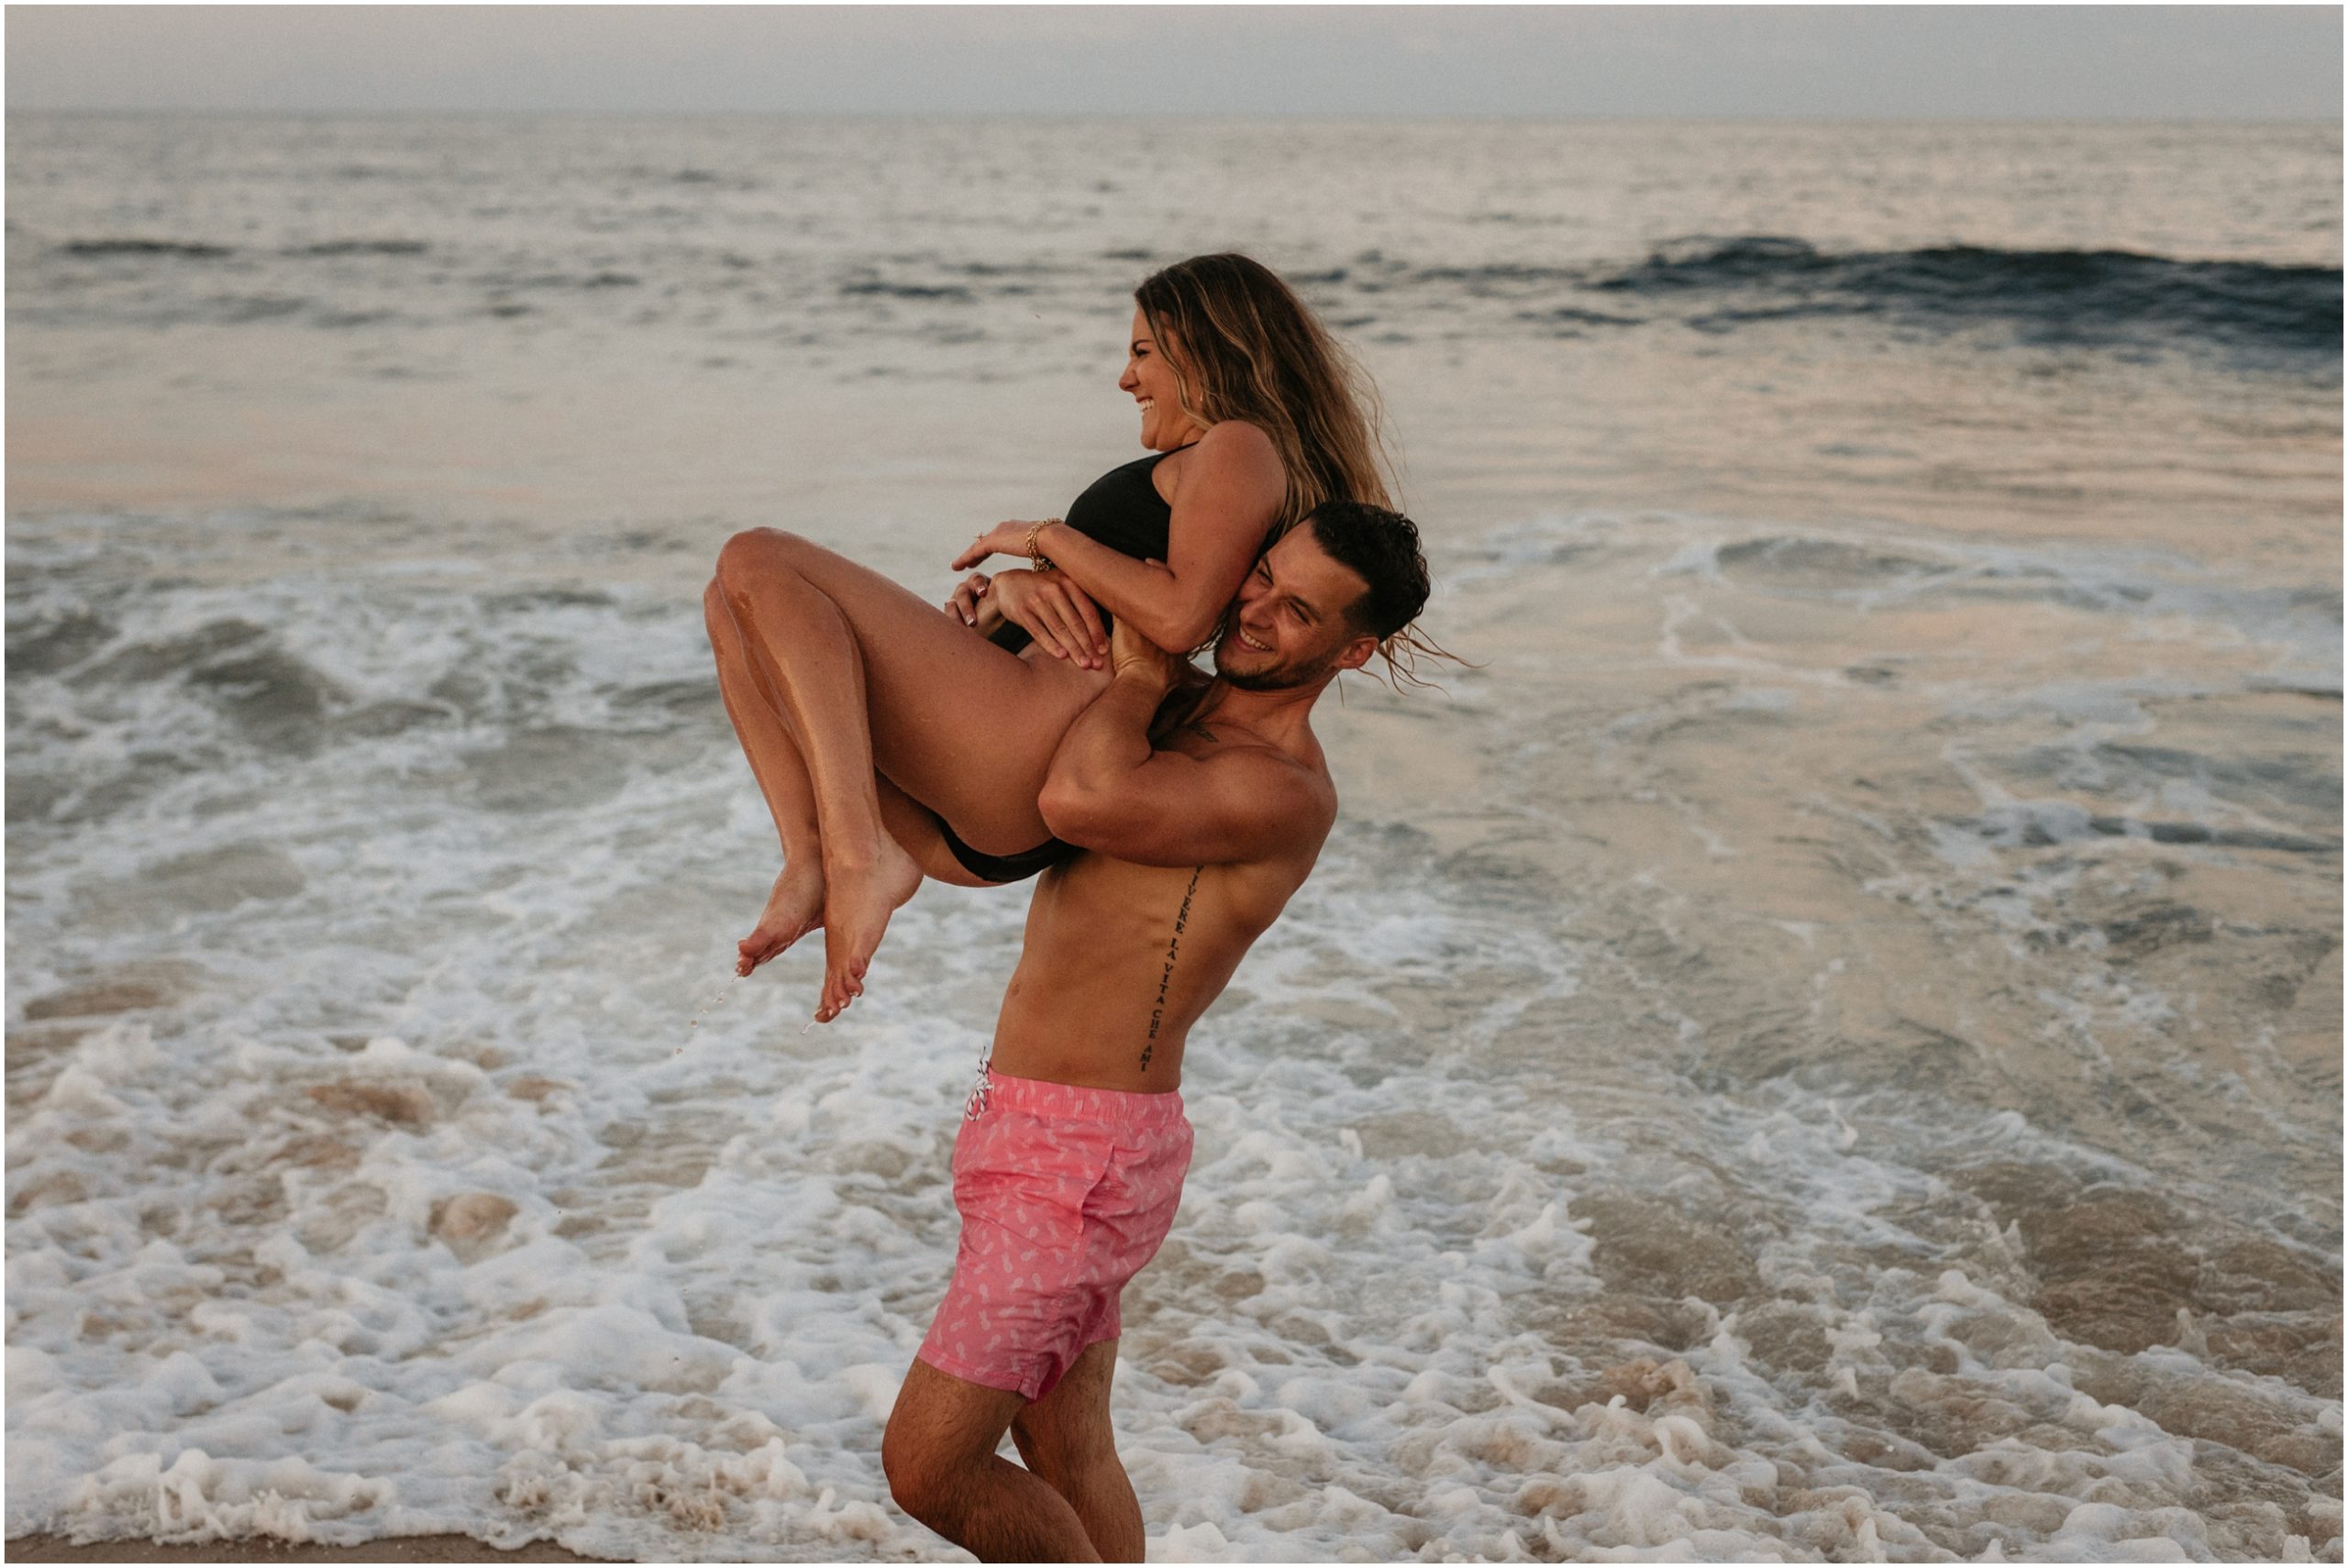 man lifting woman in ocean in new jersey